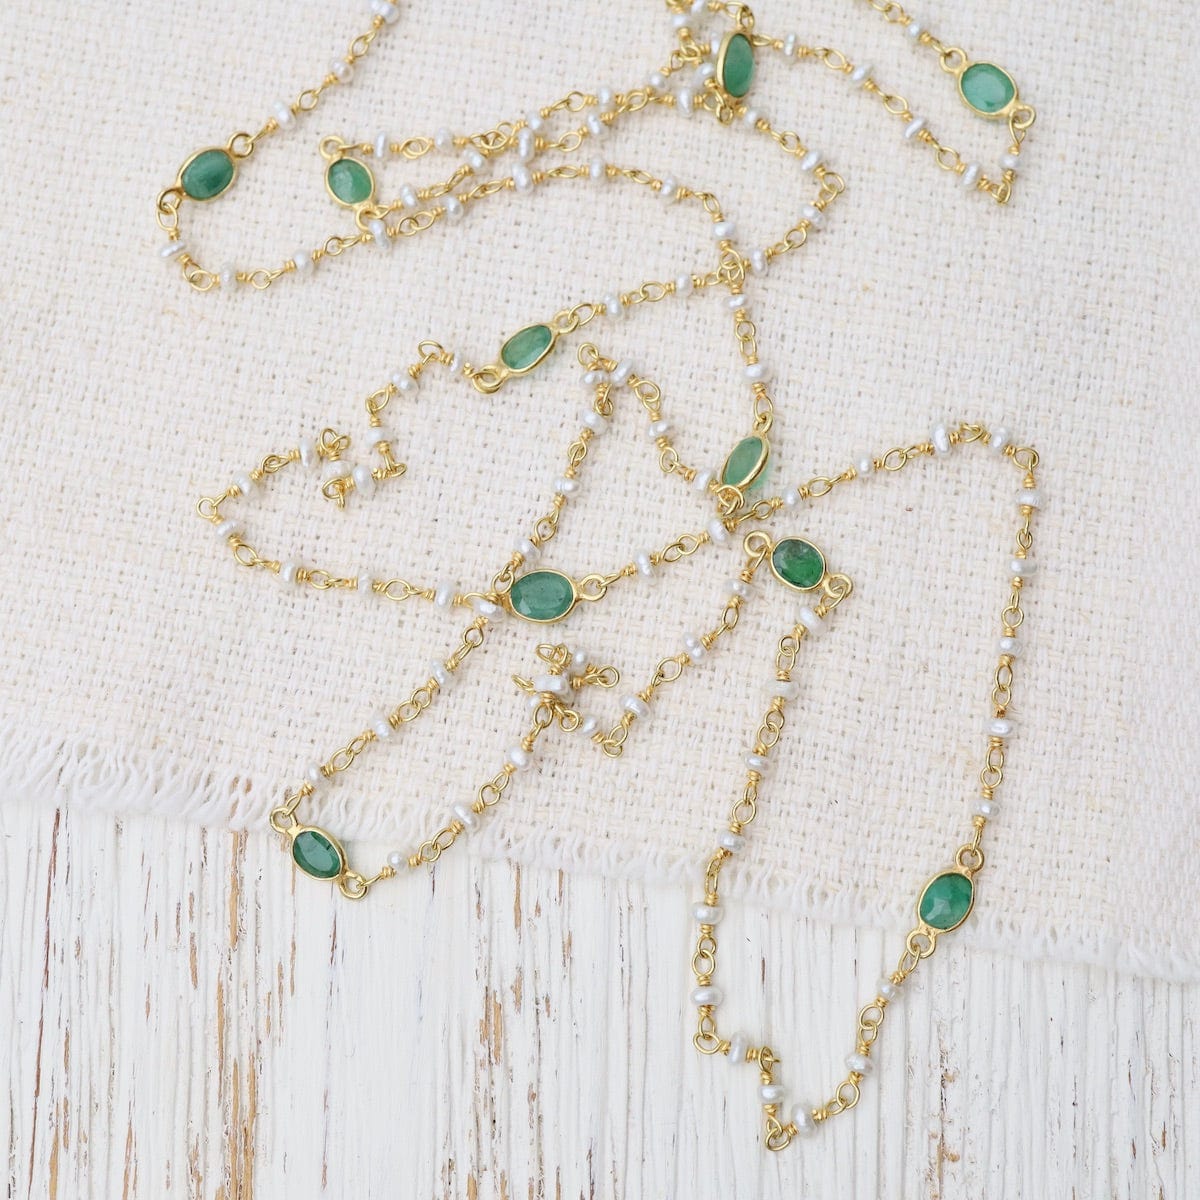 NKL-GPL Long Emerald & Pearl Necklace